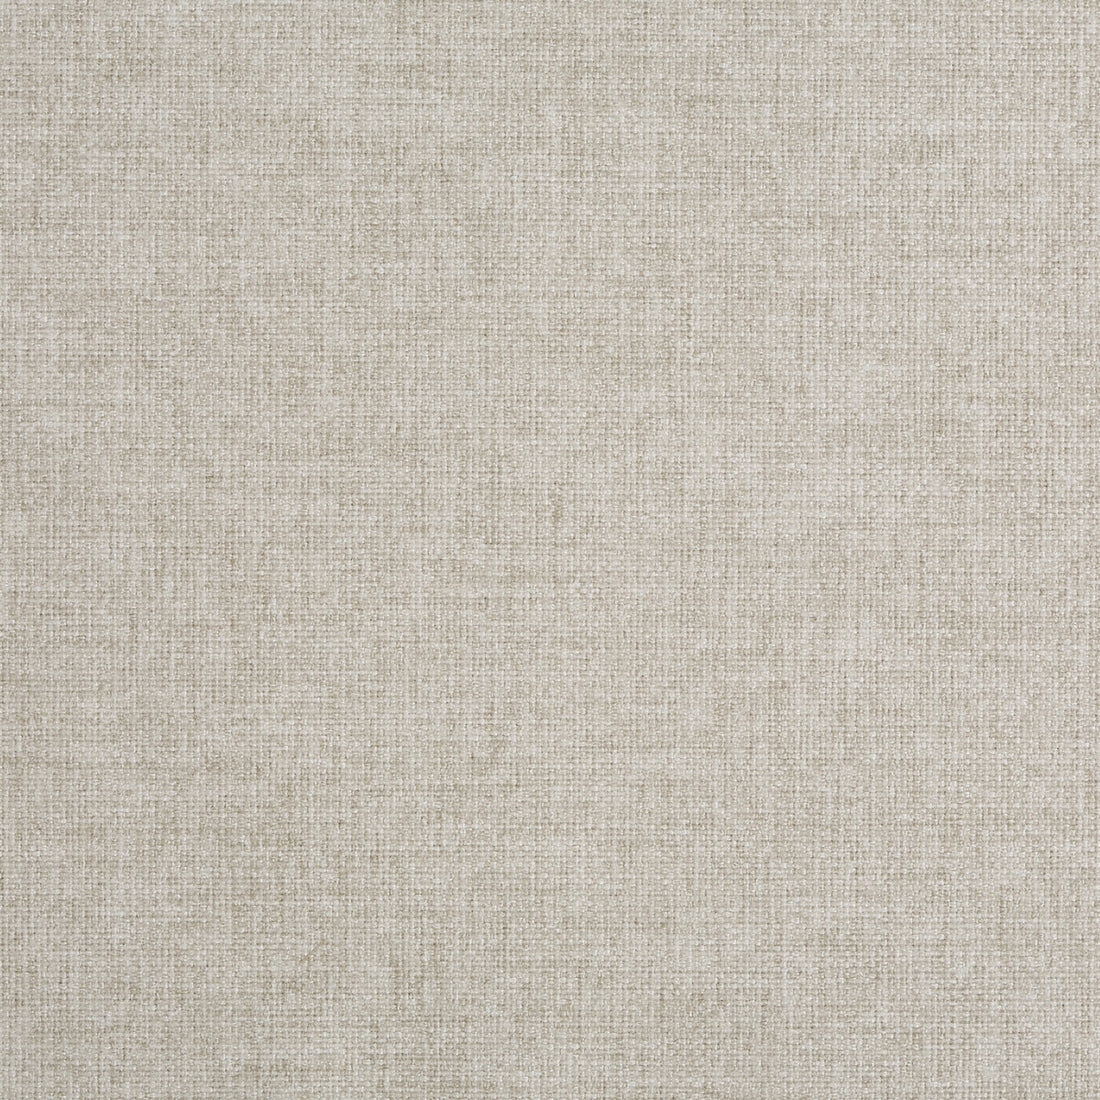 Kravet Smart fabric in 35121-111 color - pattern 35121.111.0 - by Kravet Smart in the Performance Crypton Home collection